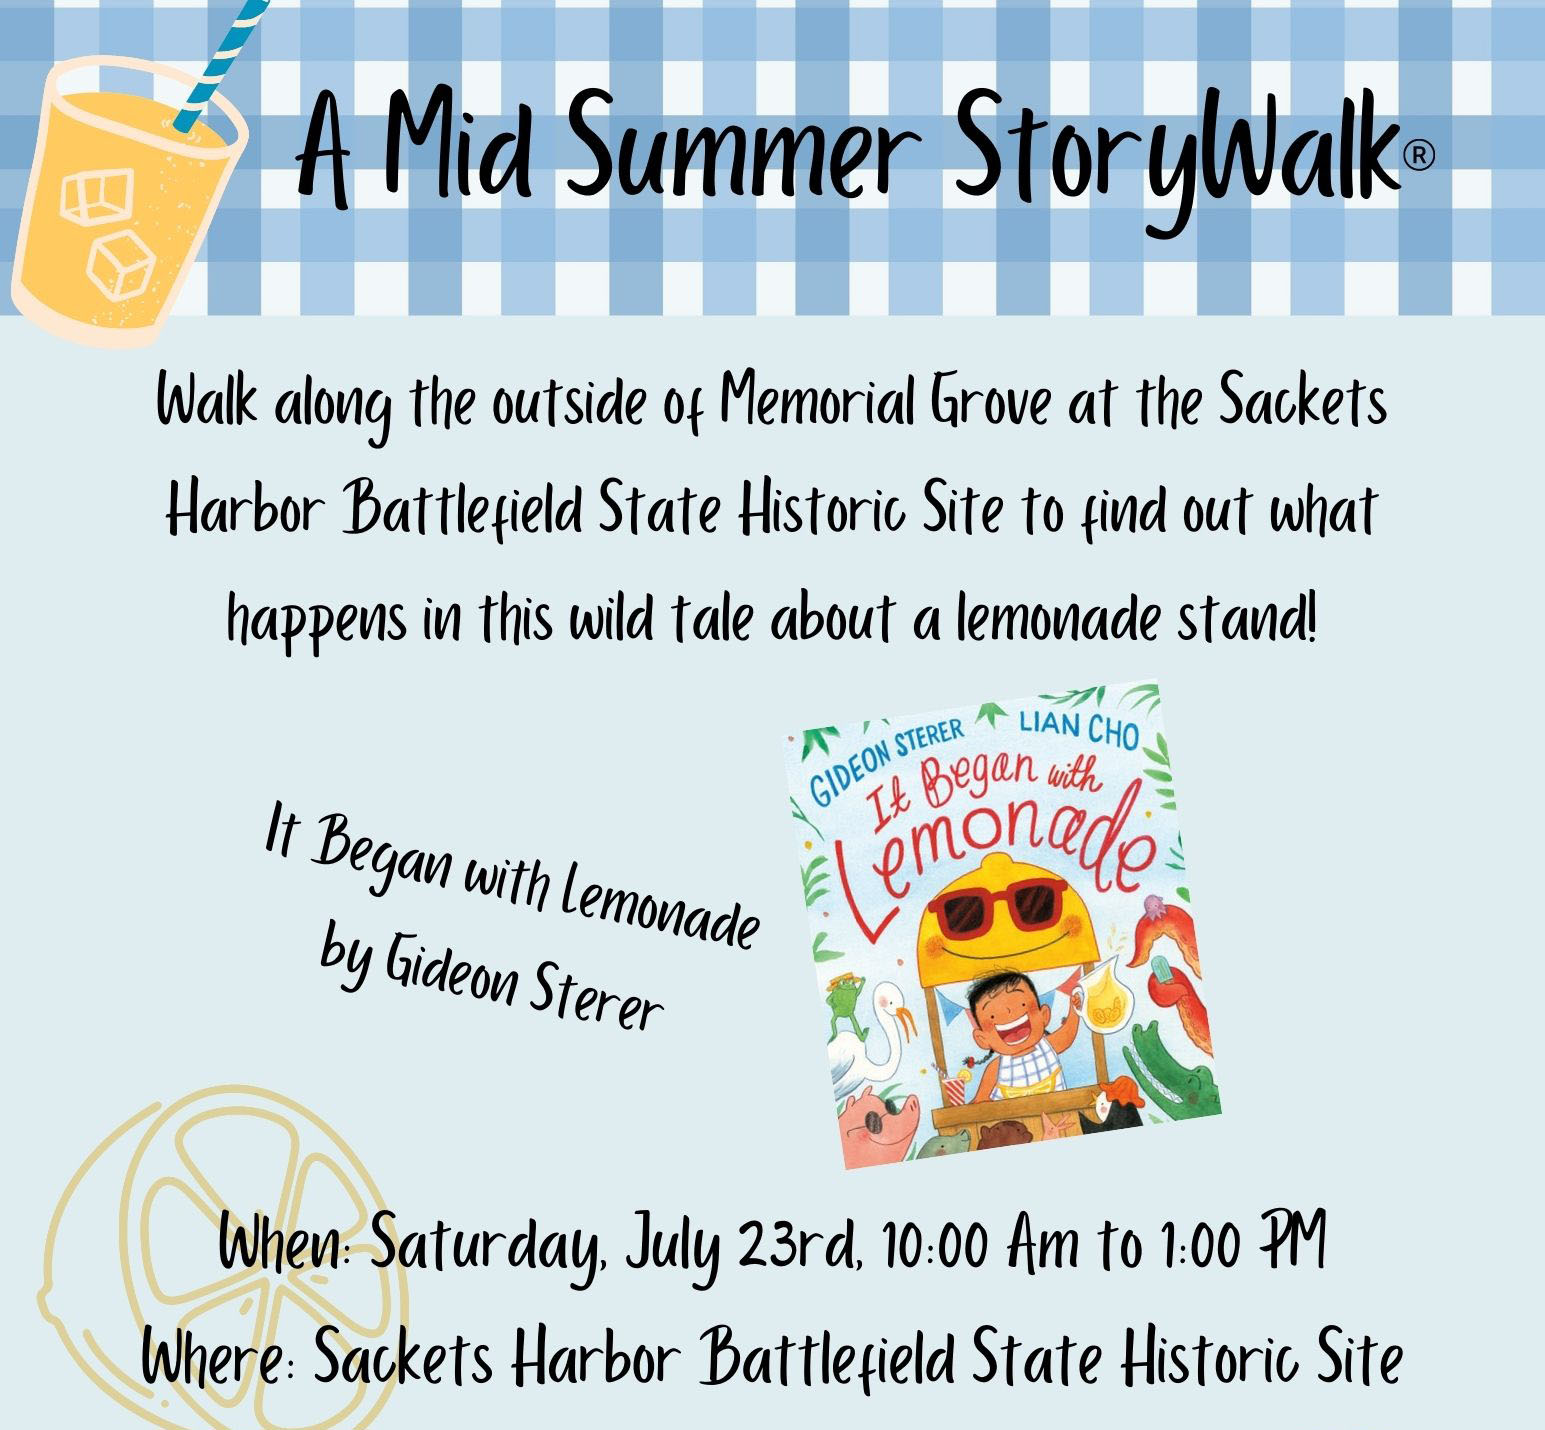 Flyer for a Mid-Summer Story Walk